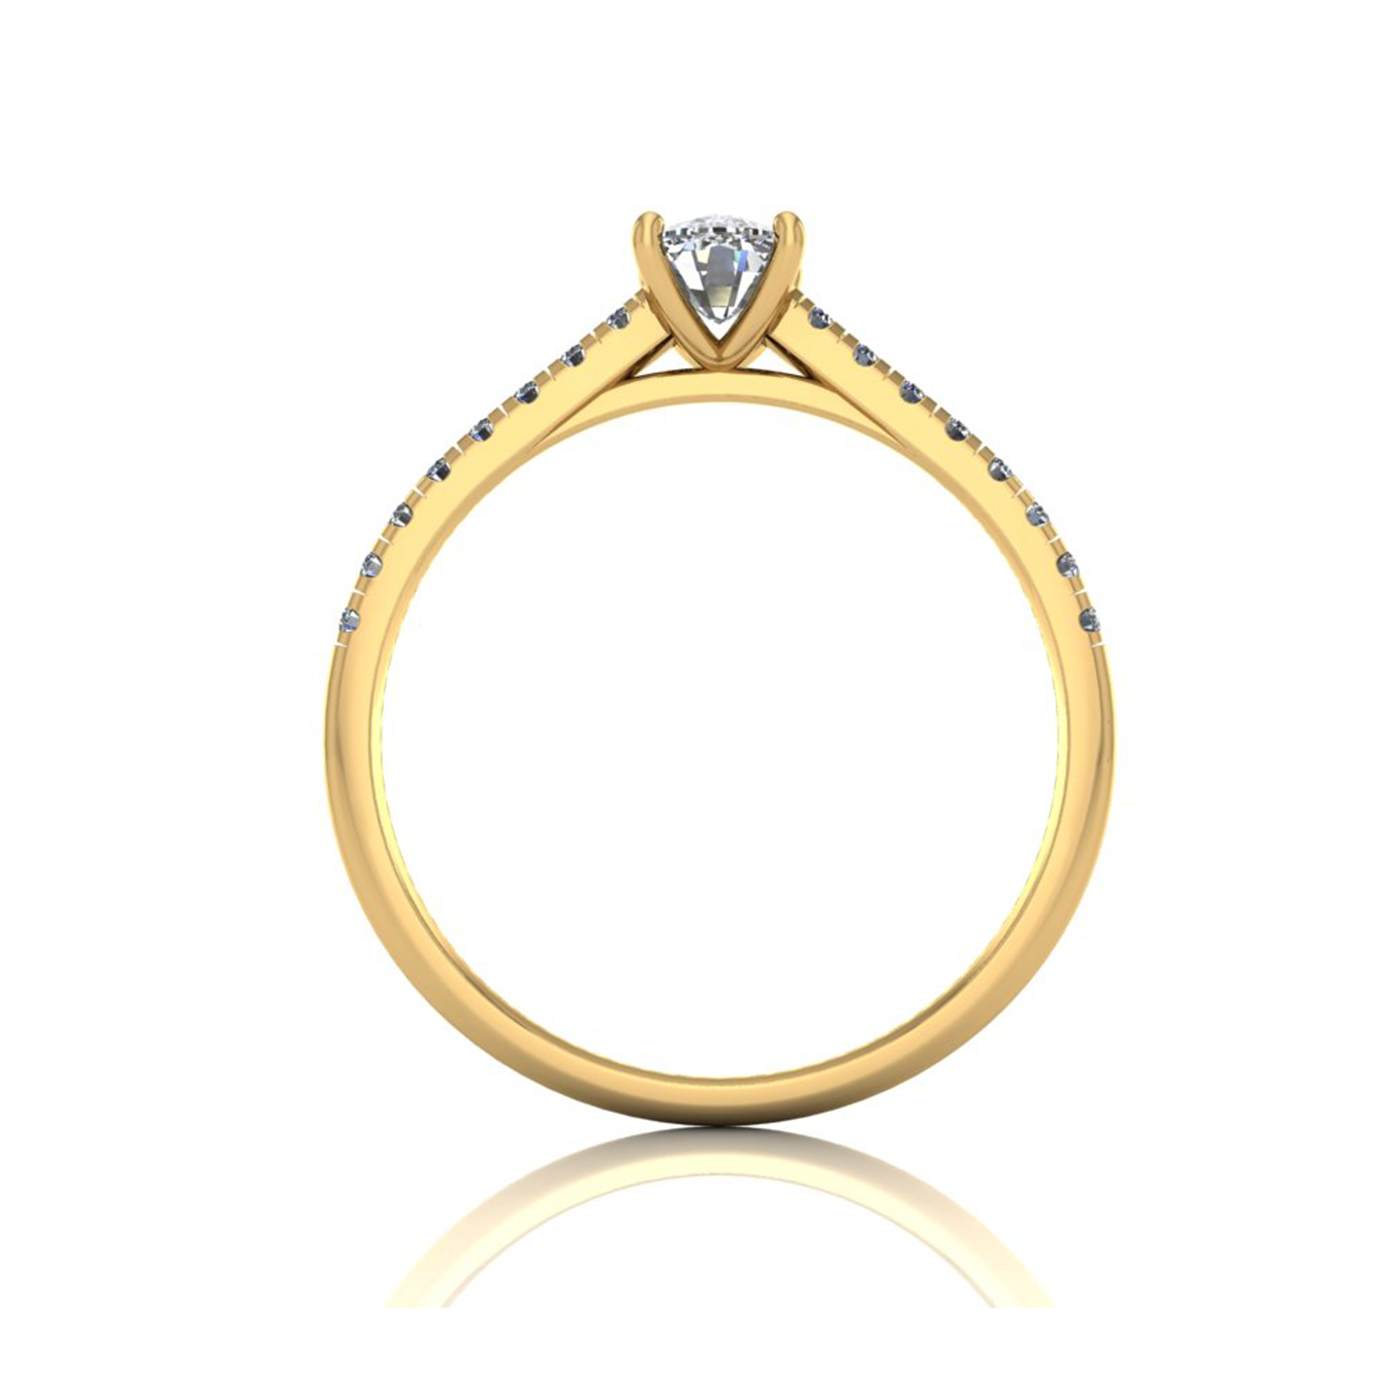 18k yellow gold  4 prongs cushion cut diamond engagement ring with whisper thin pavÉ set band Photos & images